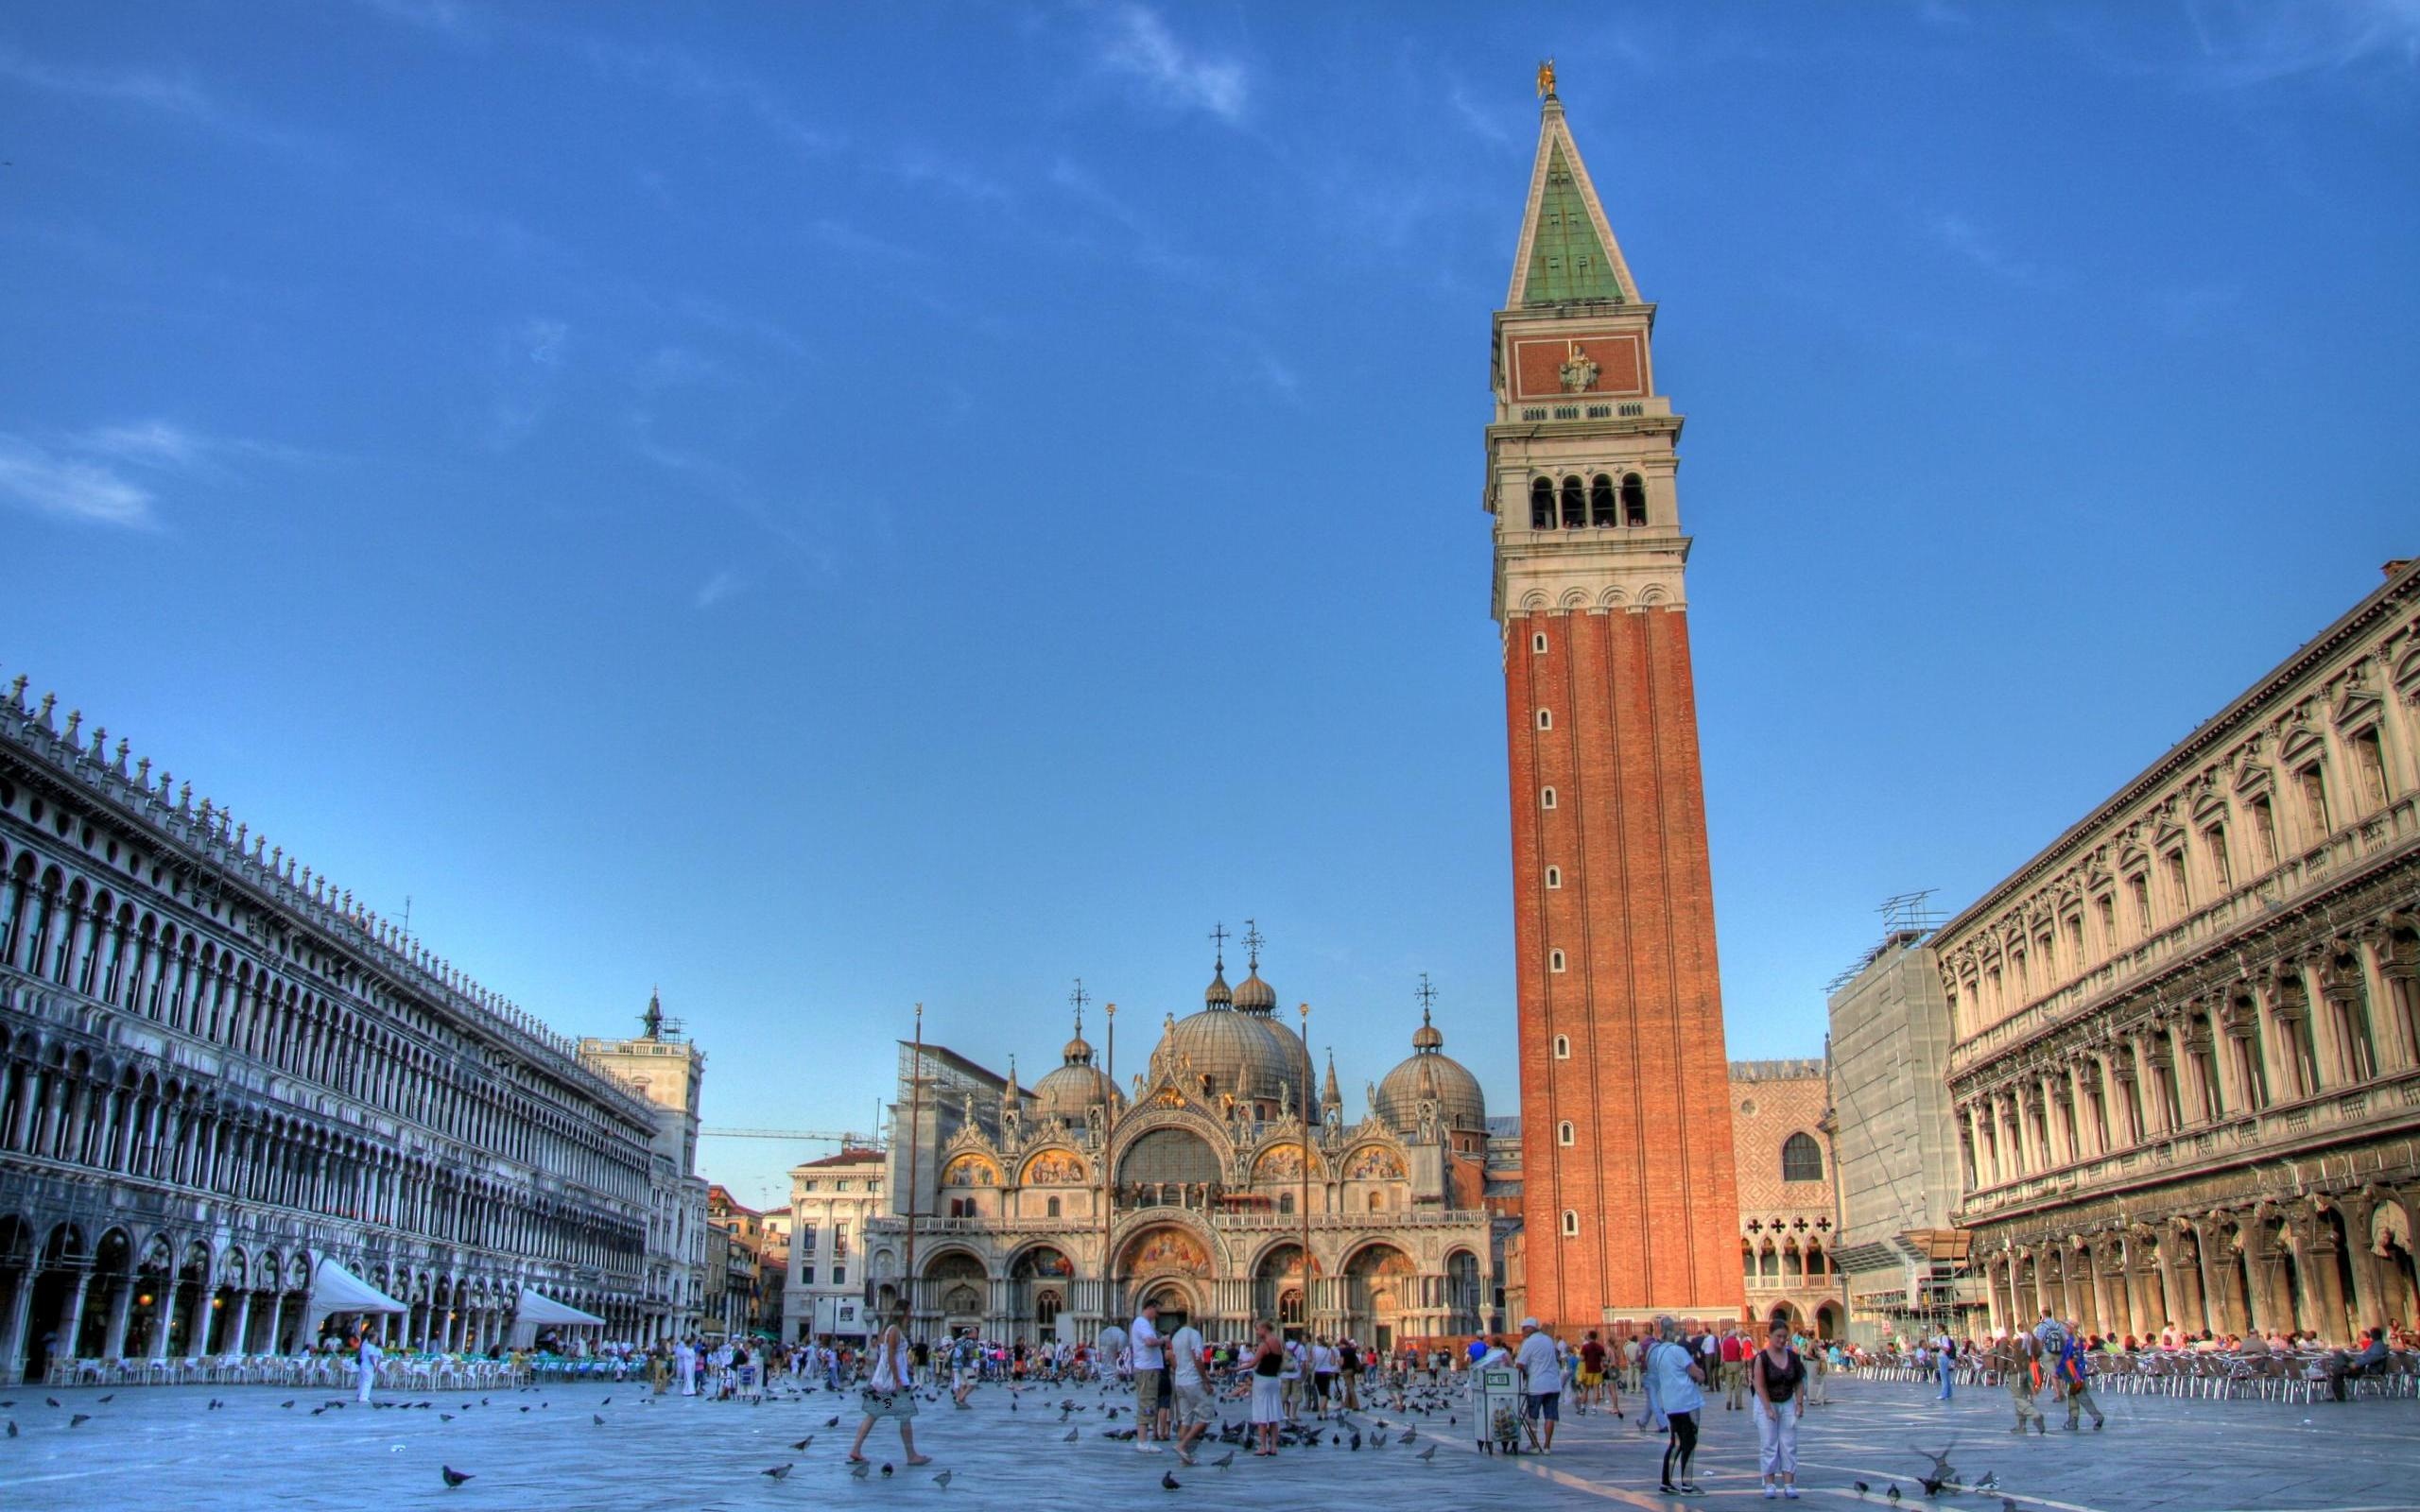 Venice's St. Marco Plaza in Italy, a majestic building amidst a scenic setting.